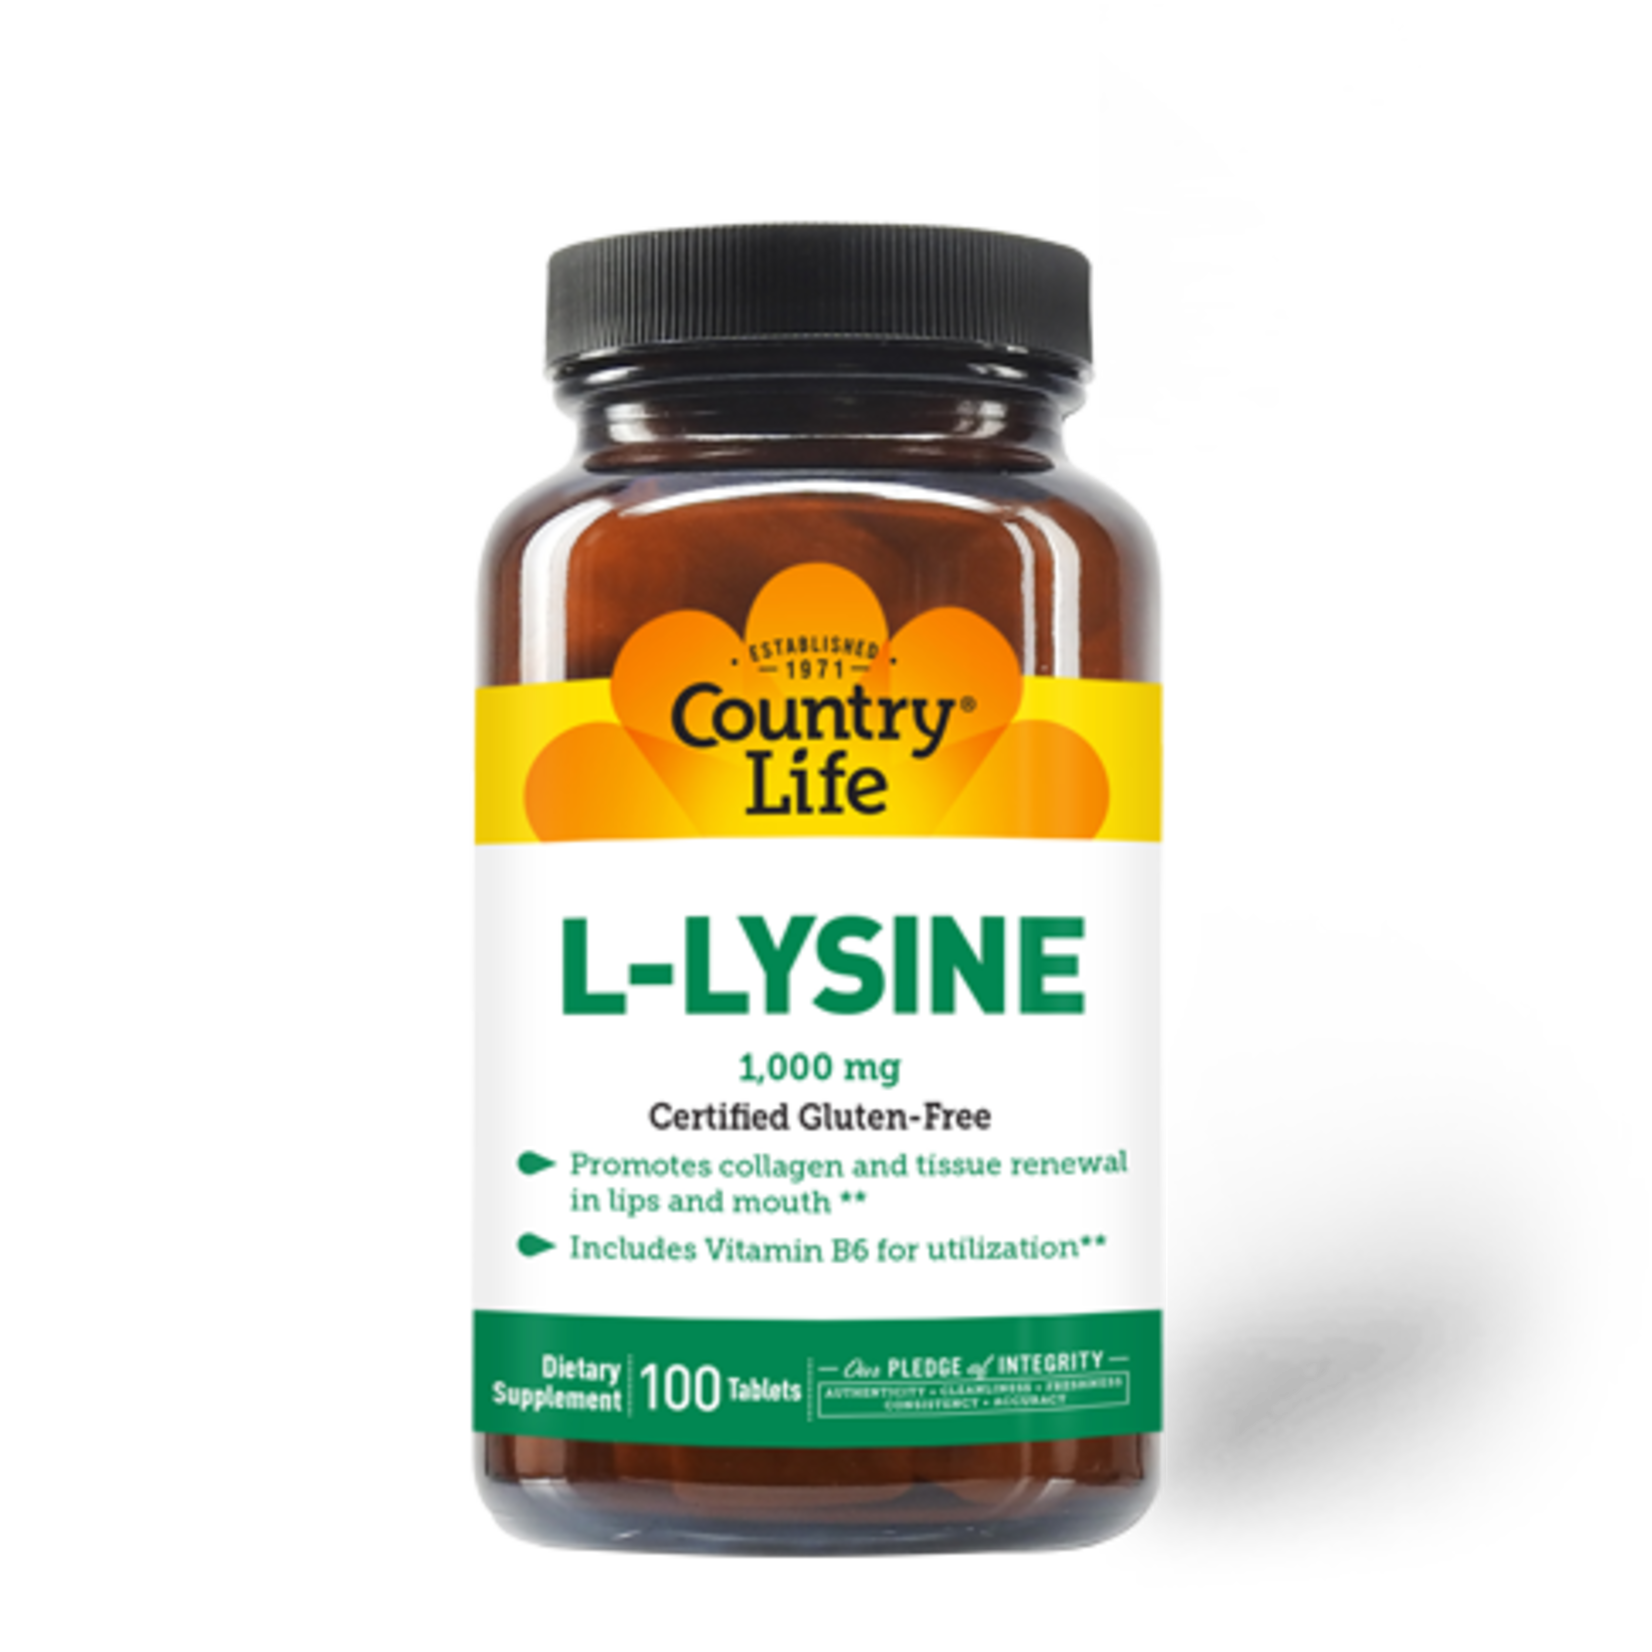 Country Life Country Life - L Lysine 1000 mg - 100 Tablets